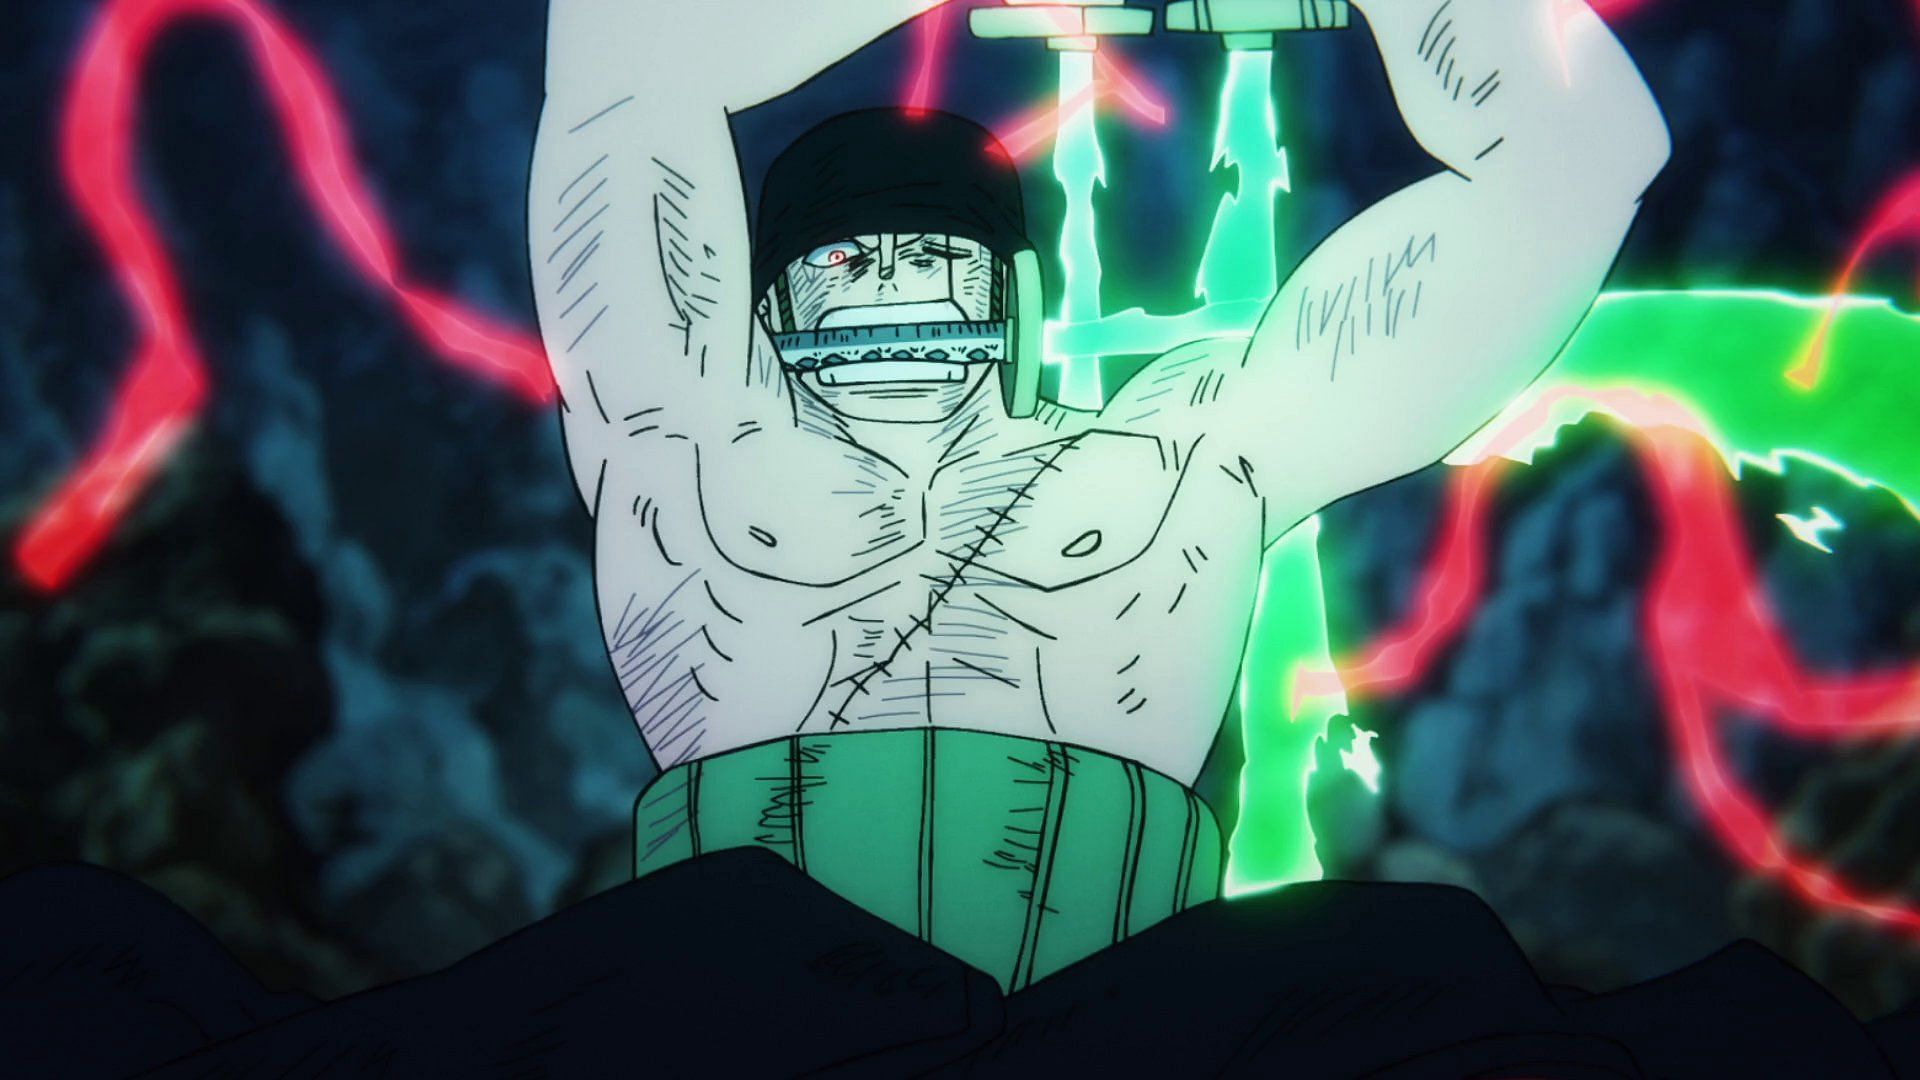 One Piece episode 1062: How strong is King of Hell Zoro? Explored